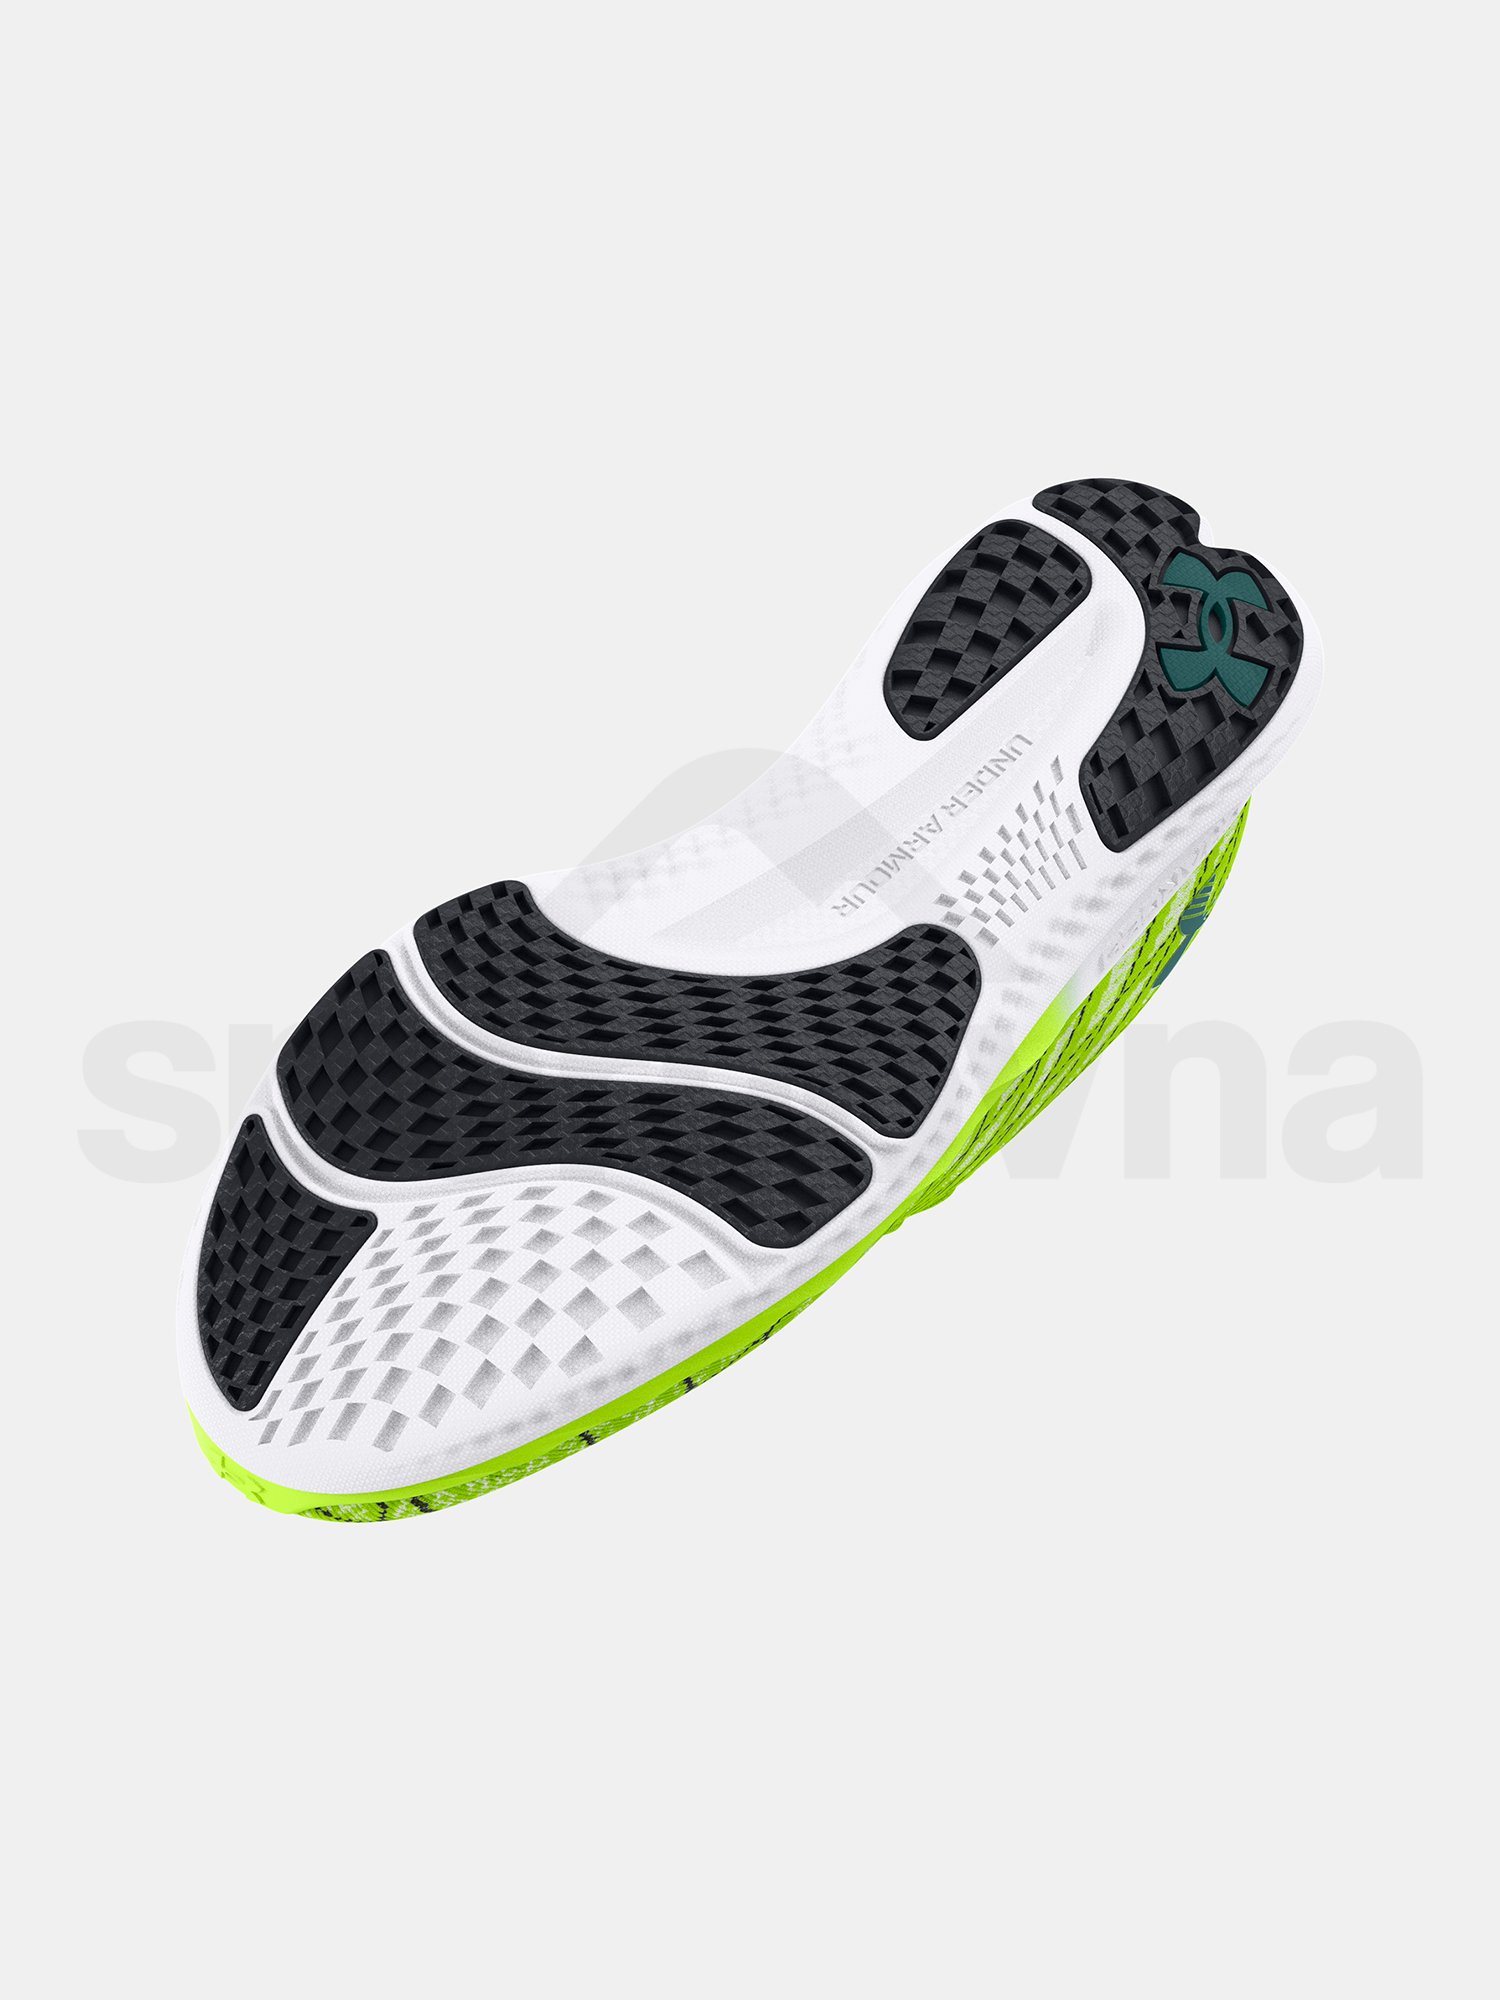 Boty Under Armour UA Charged Breeze 2-GRN